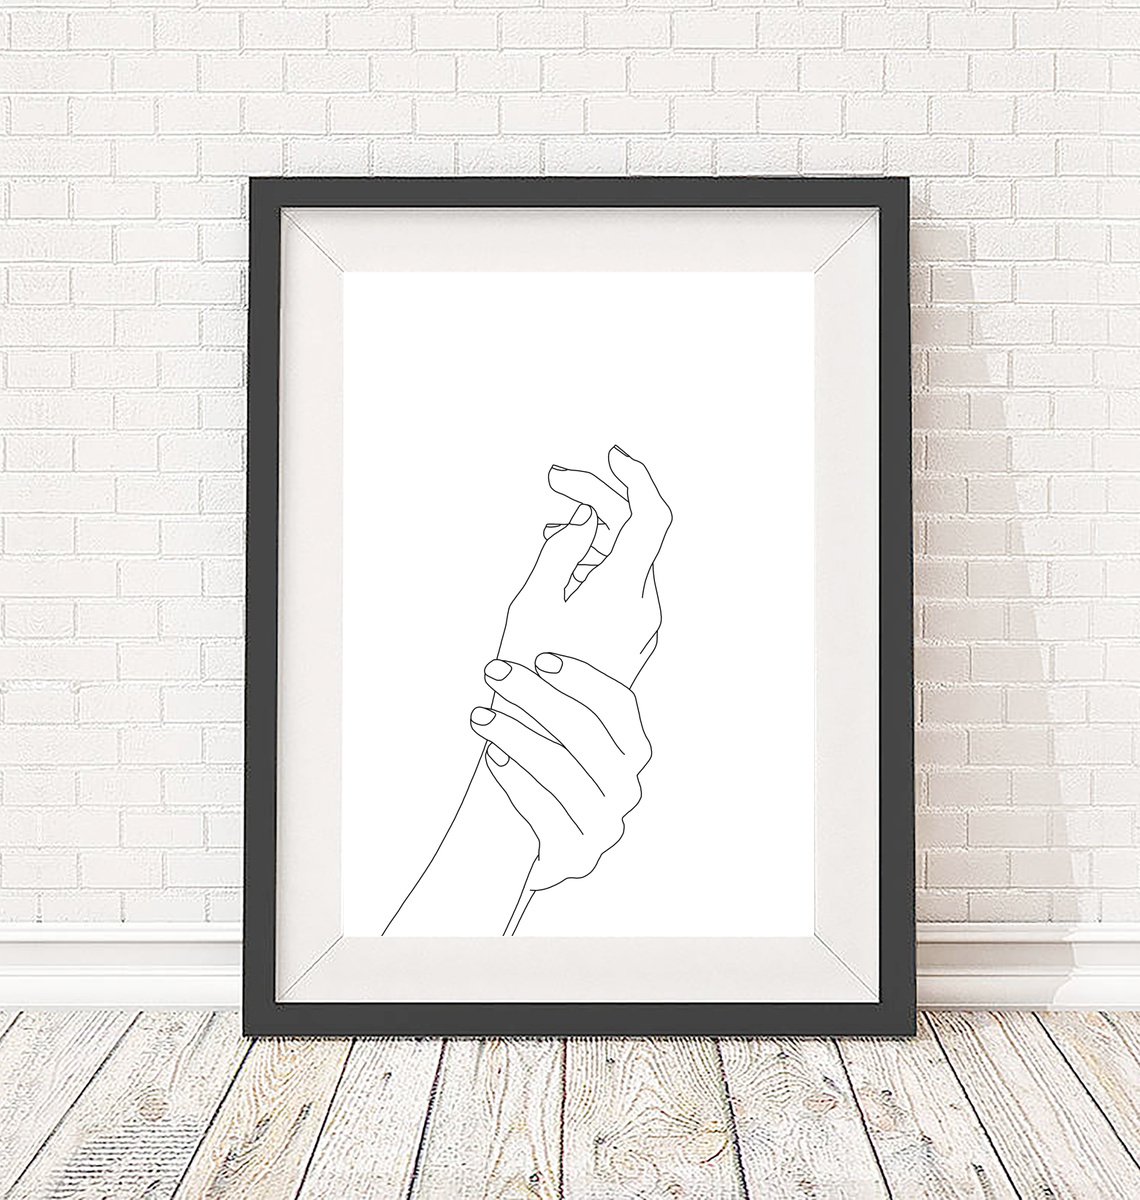 Hands illustration - India - Art print by The Colour Study